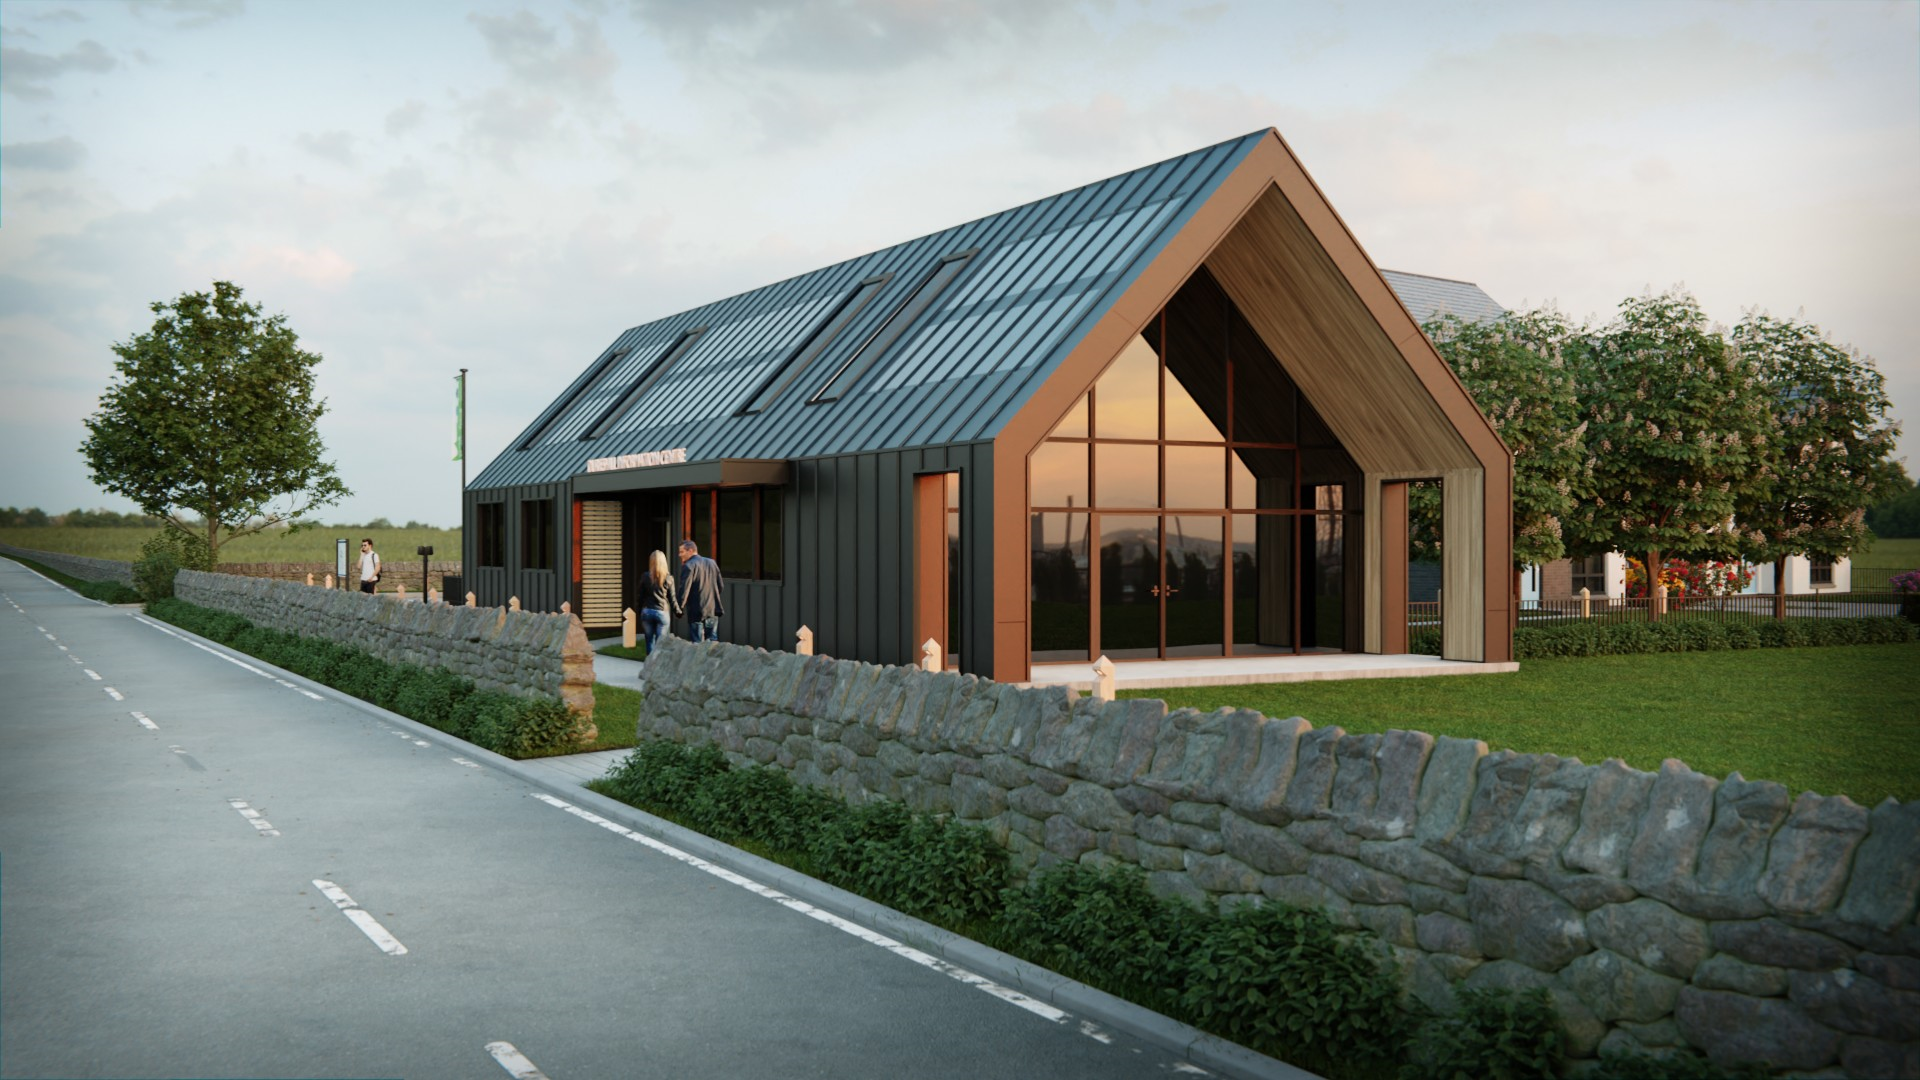 Springfield to showcase Stirling village with new information centre and show homes